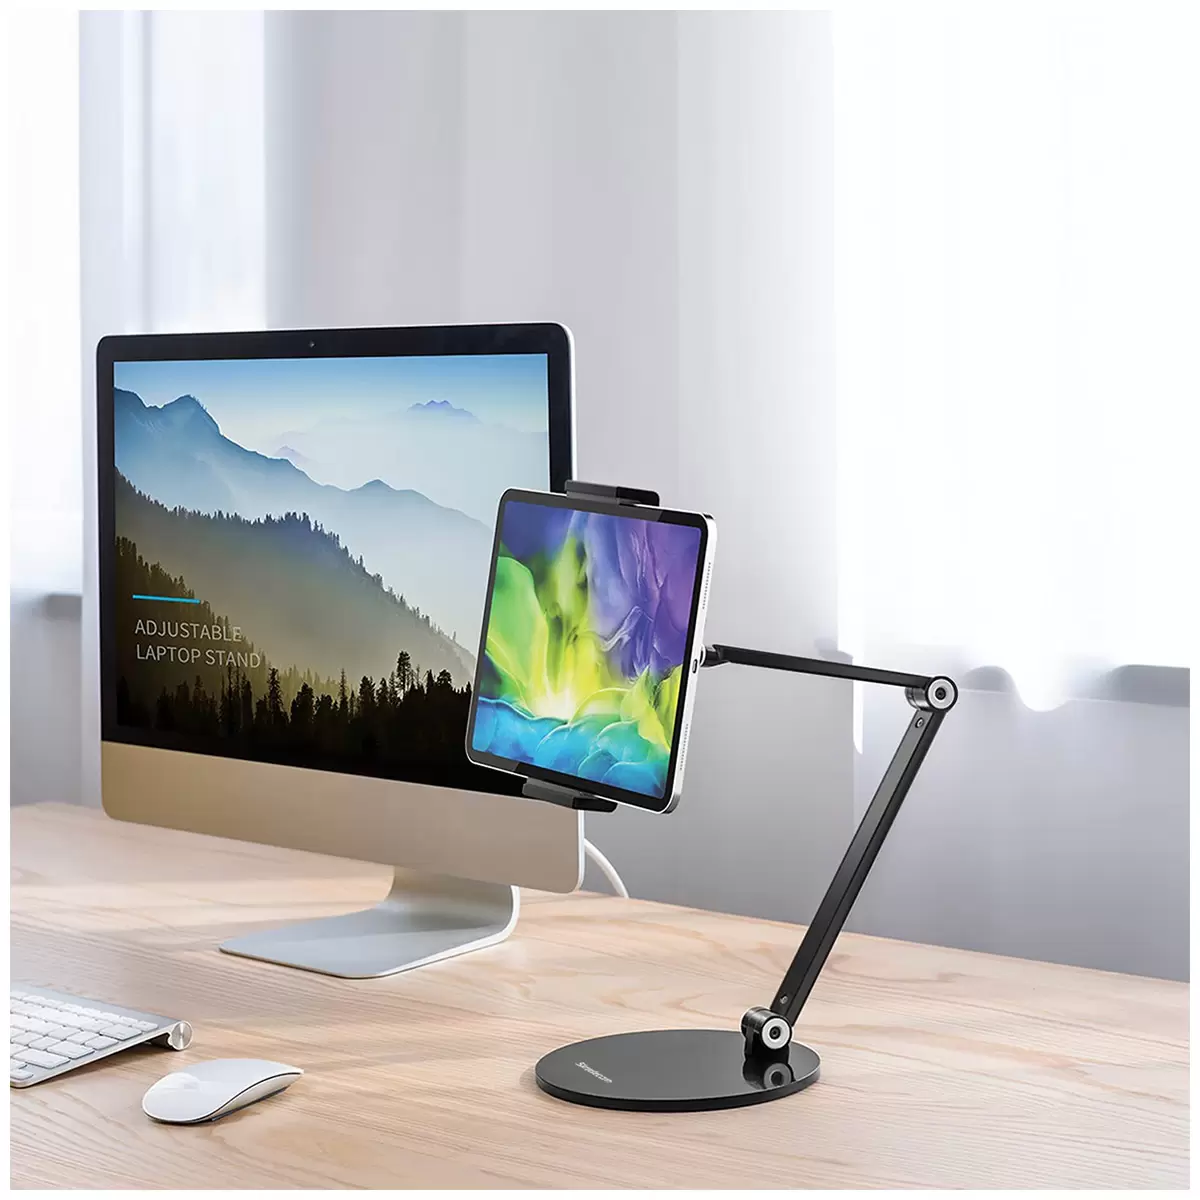 Simplecom Desktop Stand for Phones and Tablets up to 13"